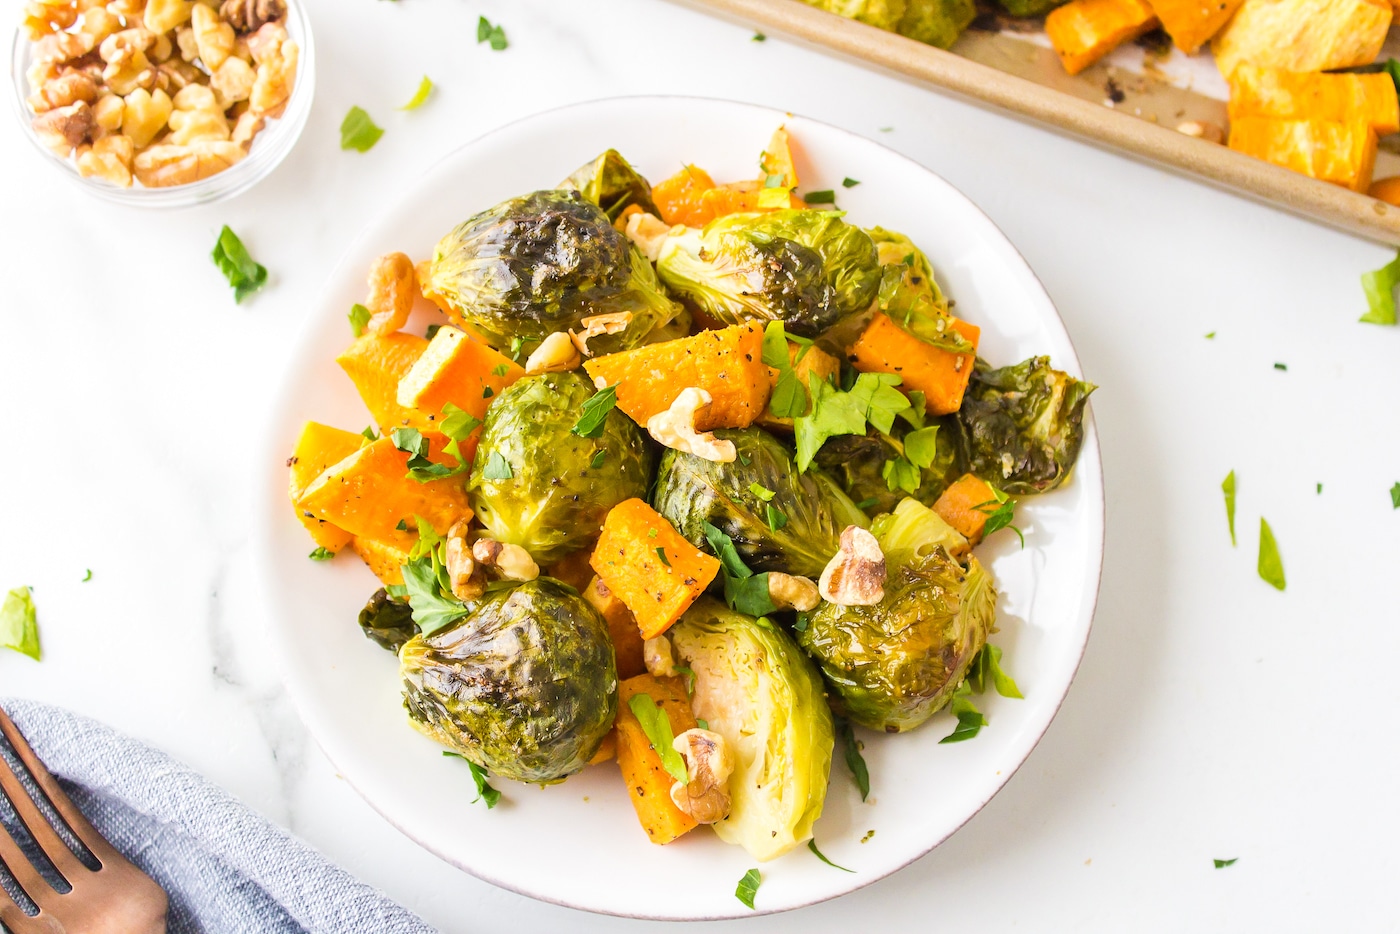 Roasted Brussels sprouts and Sweet Potatoes